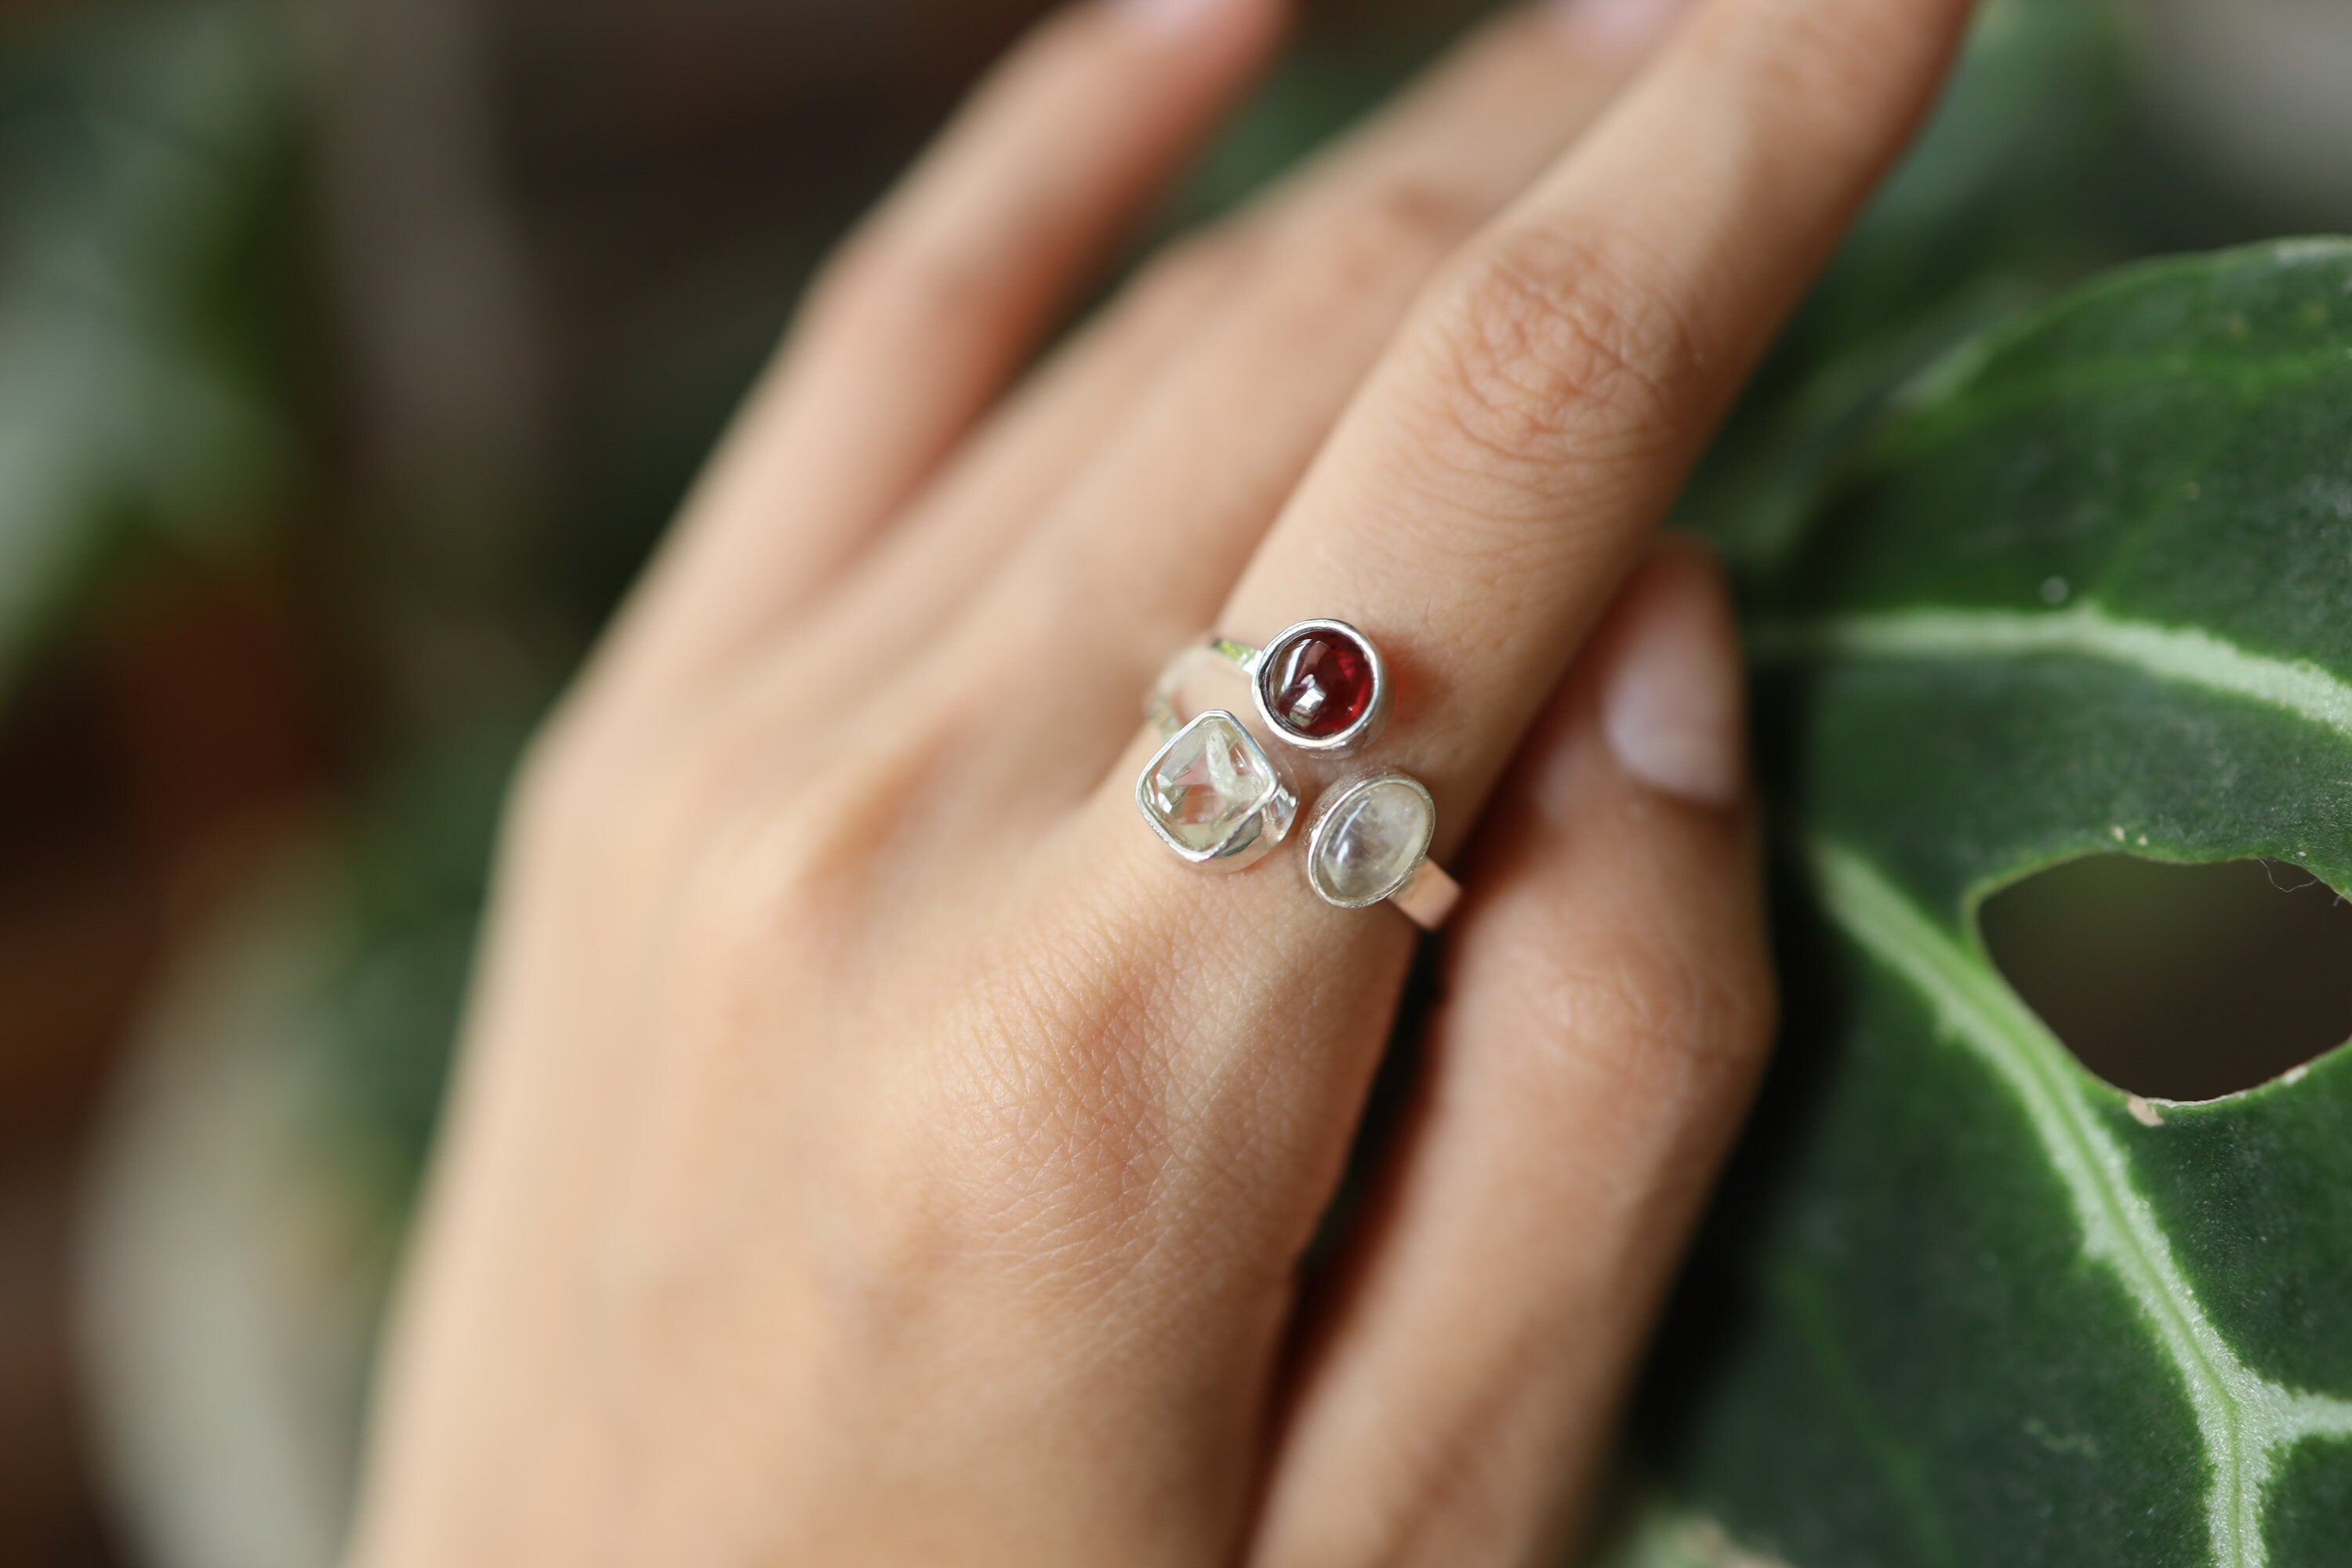 Open Adjustable Sterling Silver Ring with Garnet, Herkimer Diamond & Moonstone, Flat Hammer Textured Band, Size 5-10 US, Clarity Strength